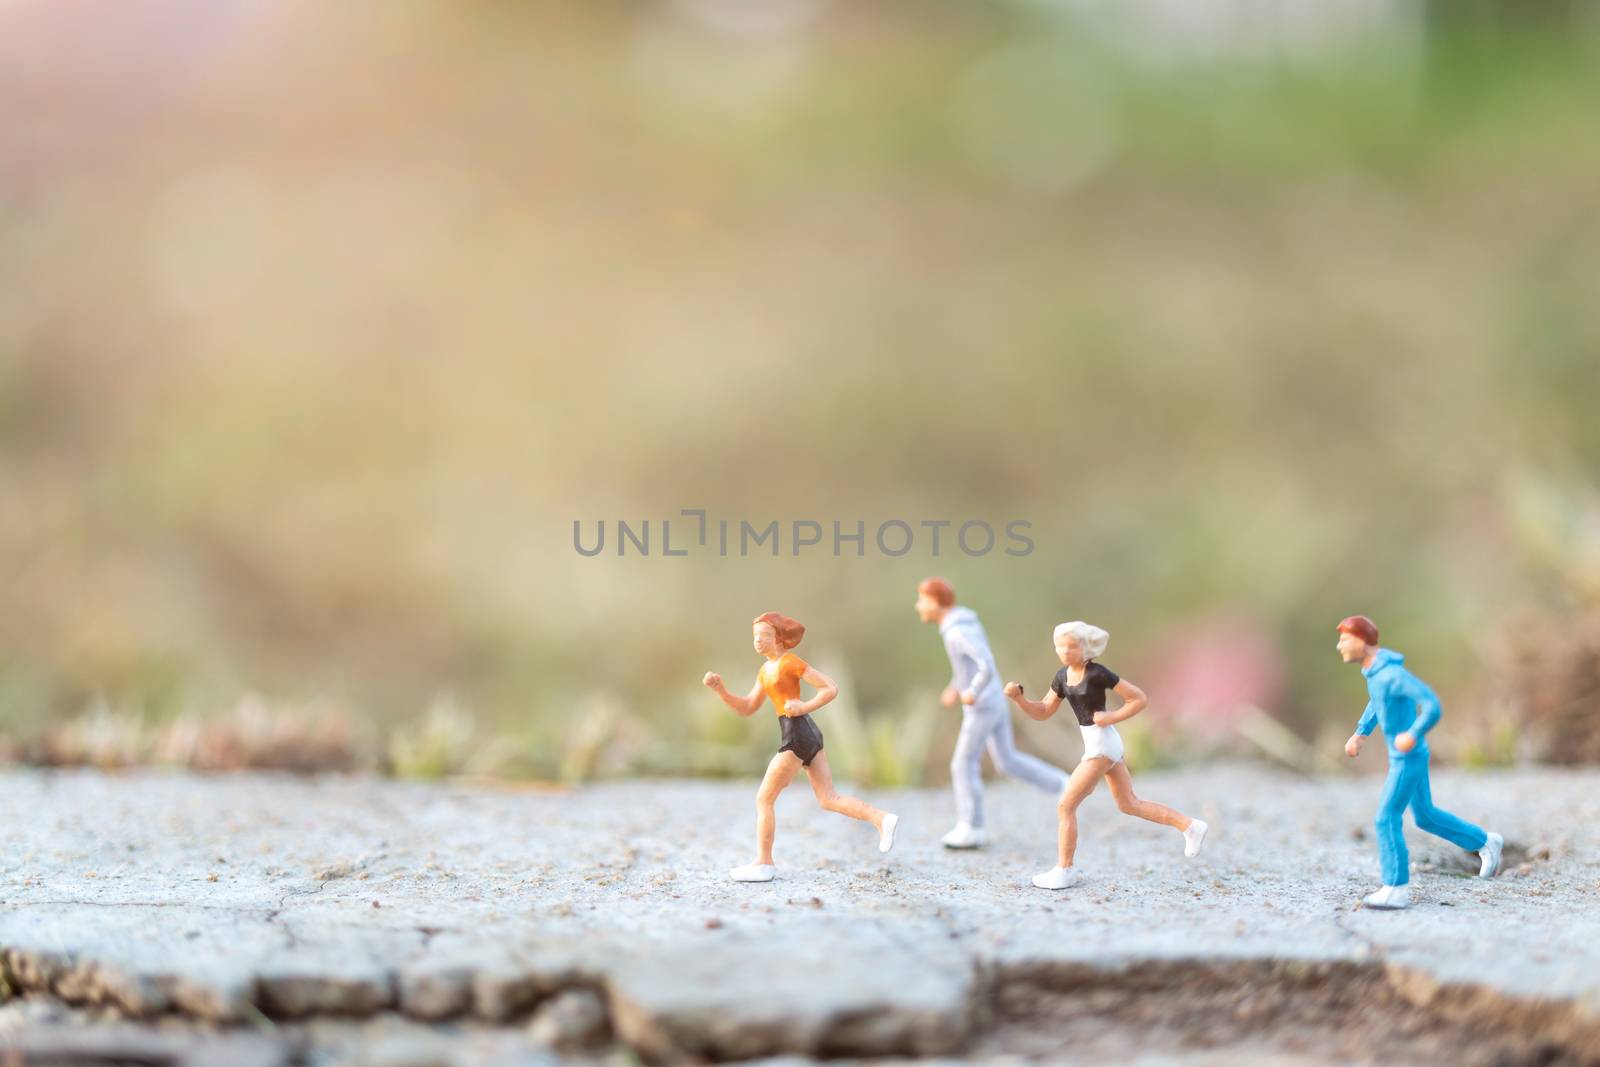 Miniature people : Running on the road with nature background  by sirichaiyaymicro